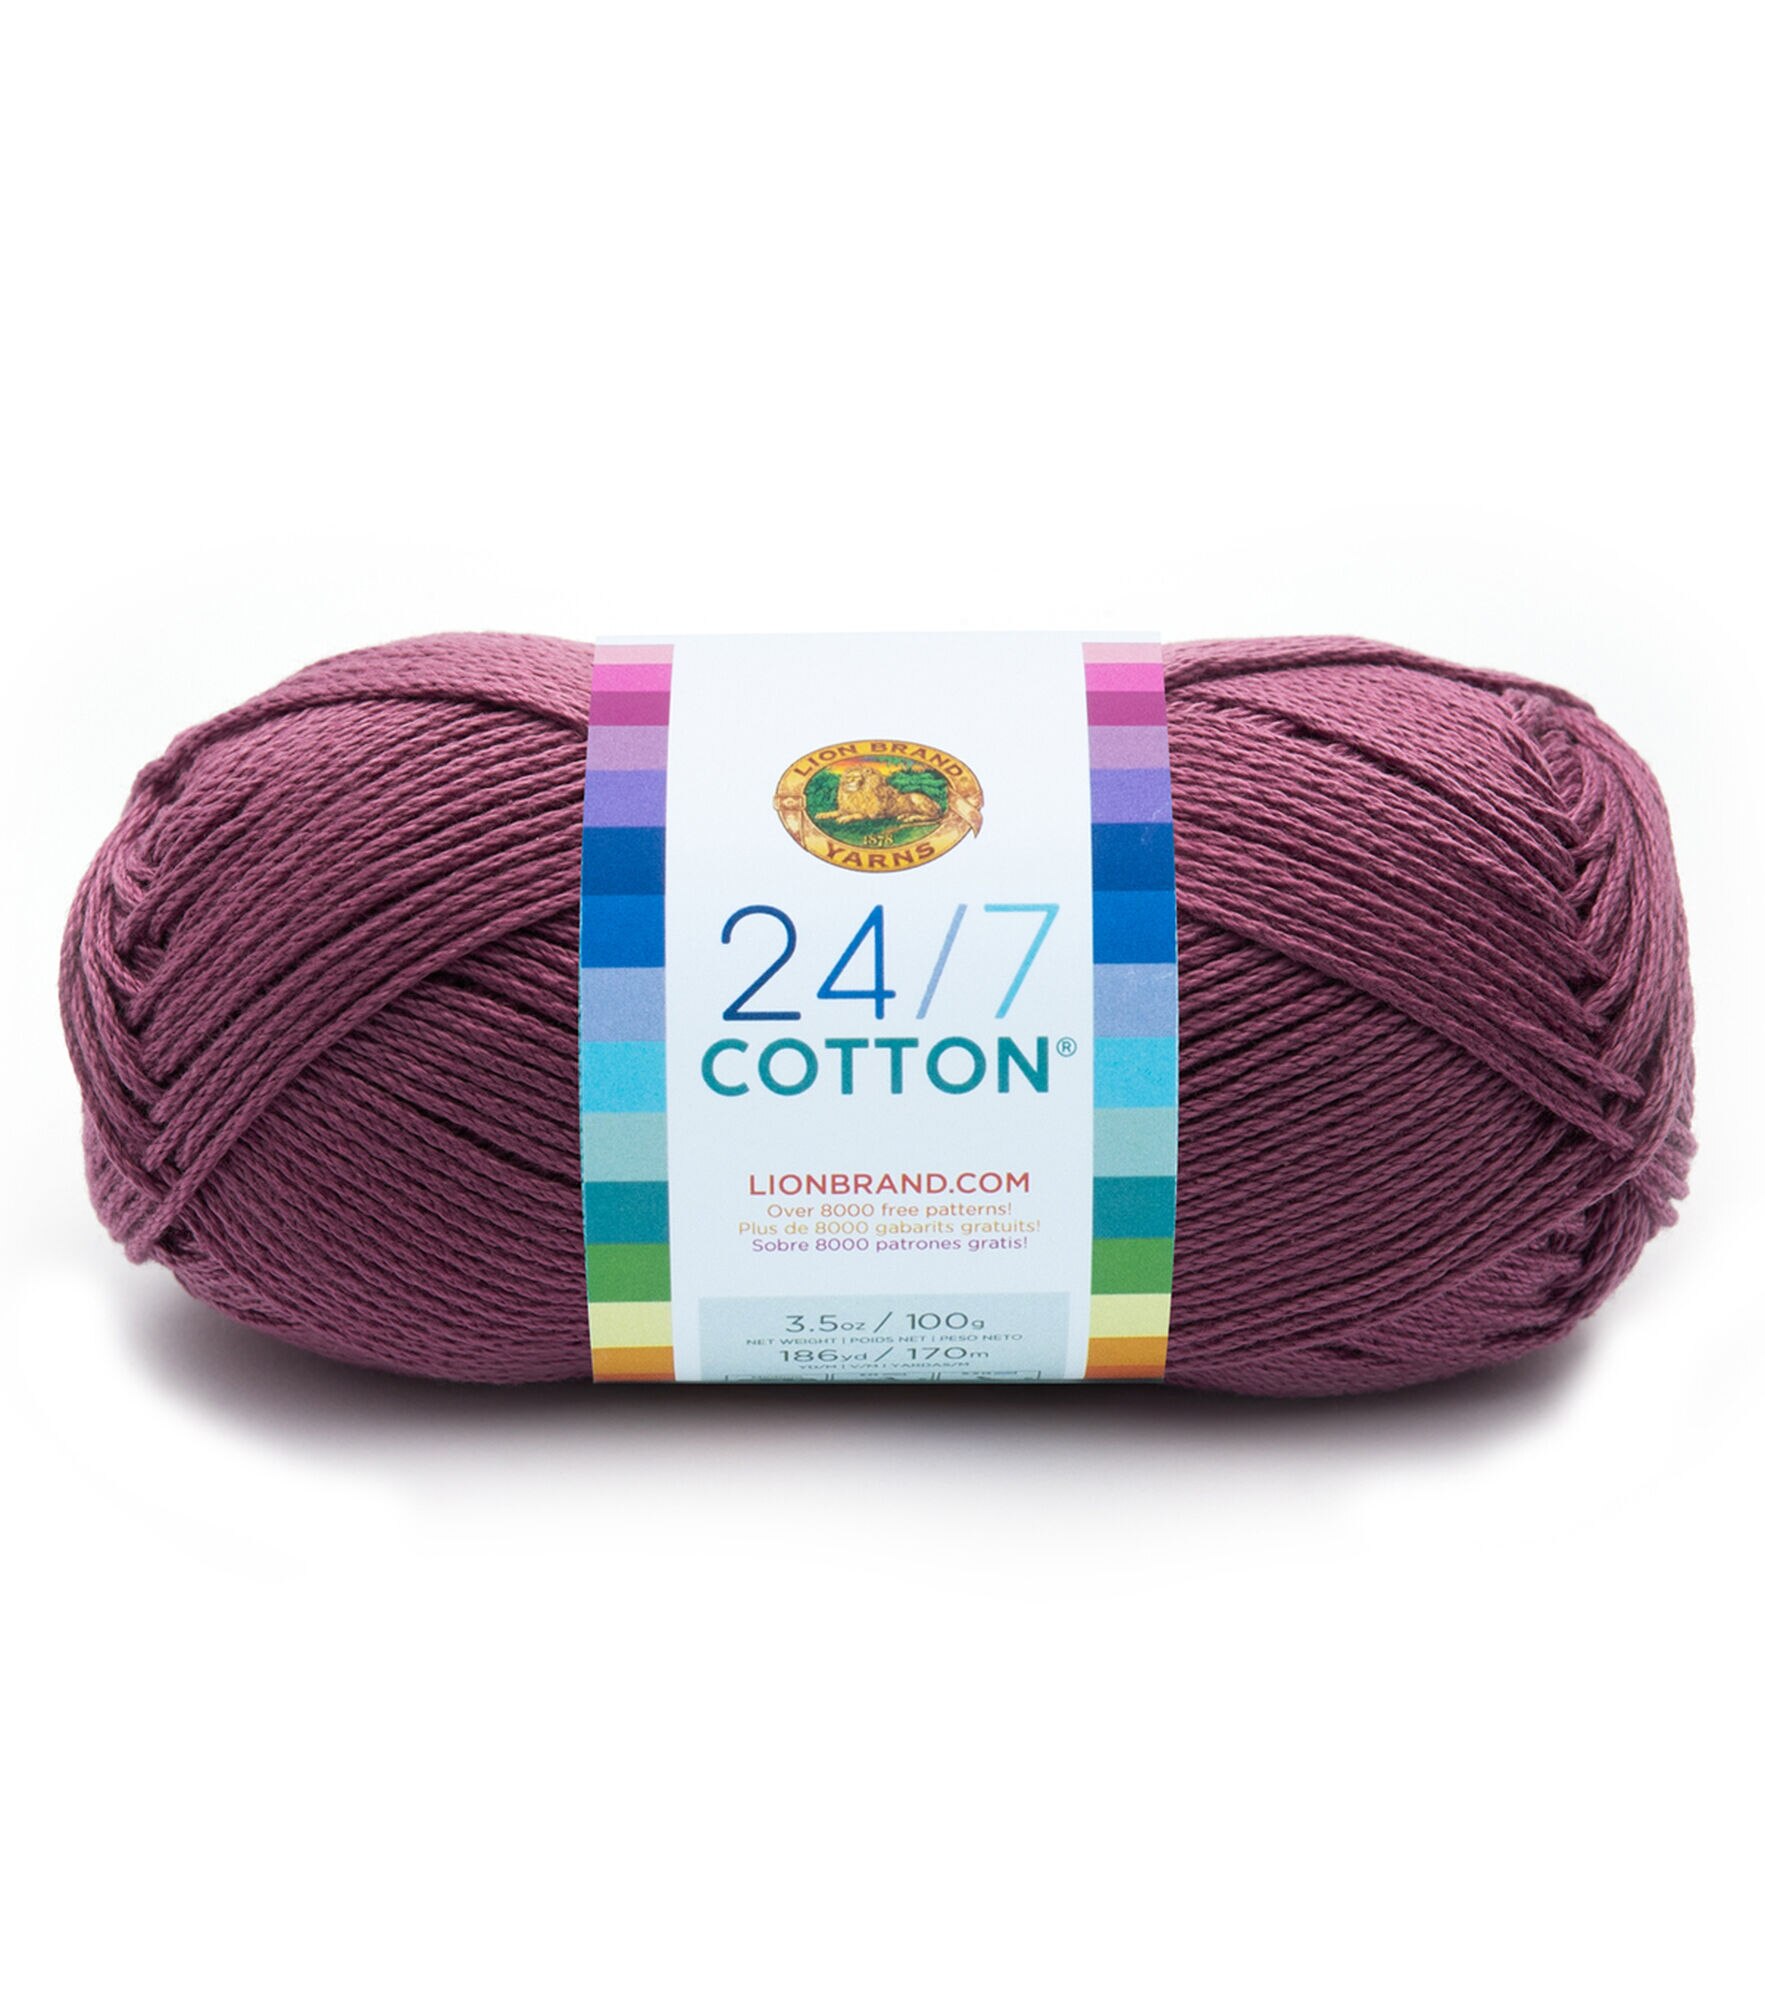 Lion Brand 24/7 Cotton 186yds Worsted Cotton Yarn, Lilac, hi-res